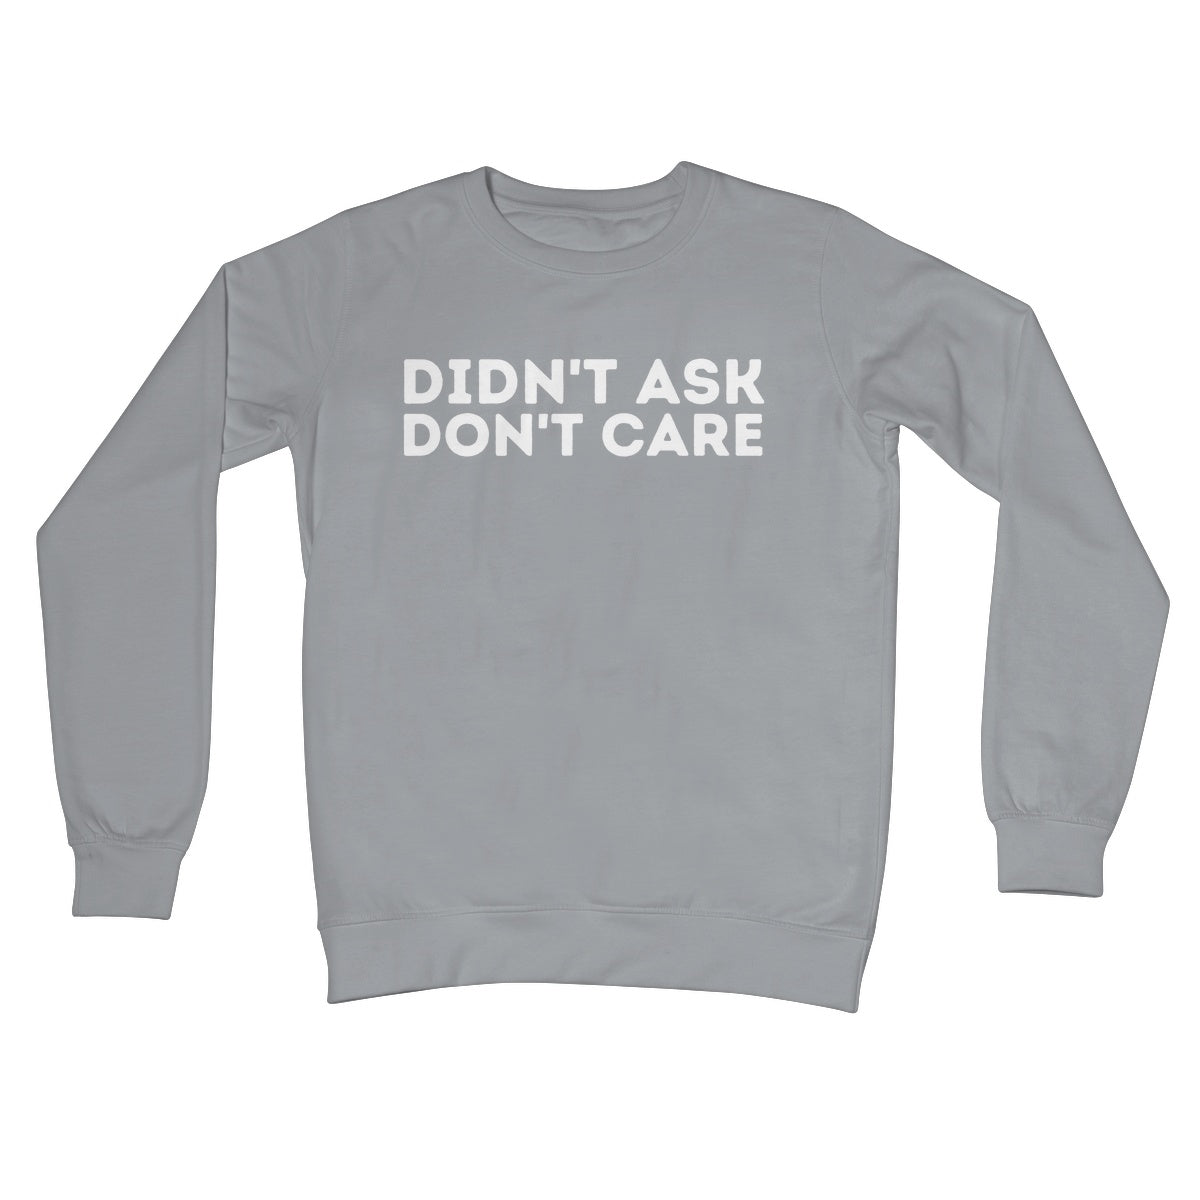 didn't ask don't care jumper grey